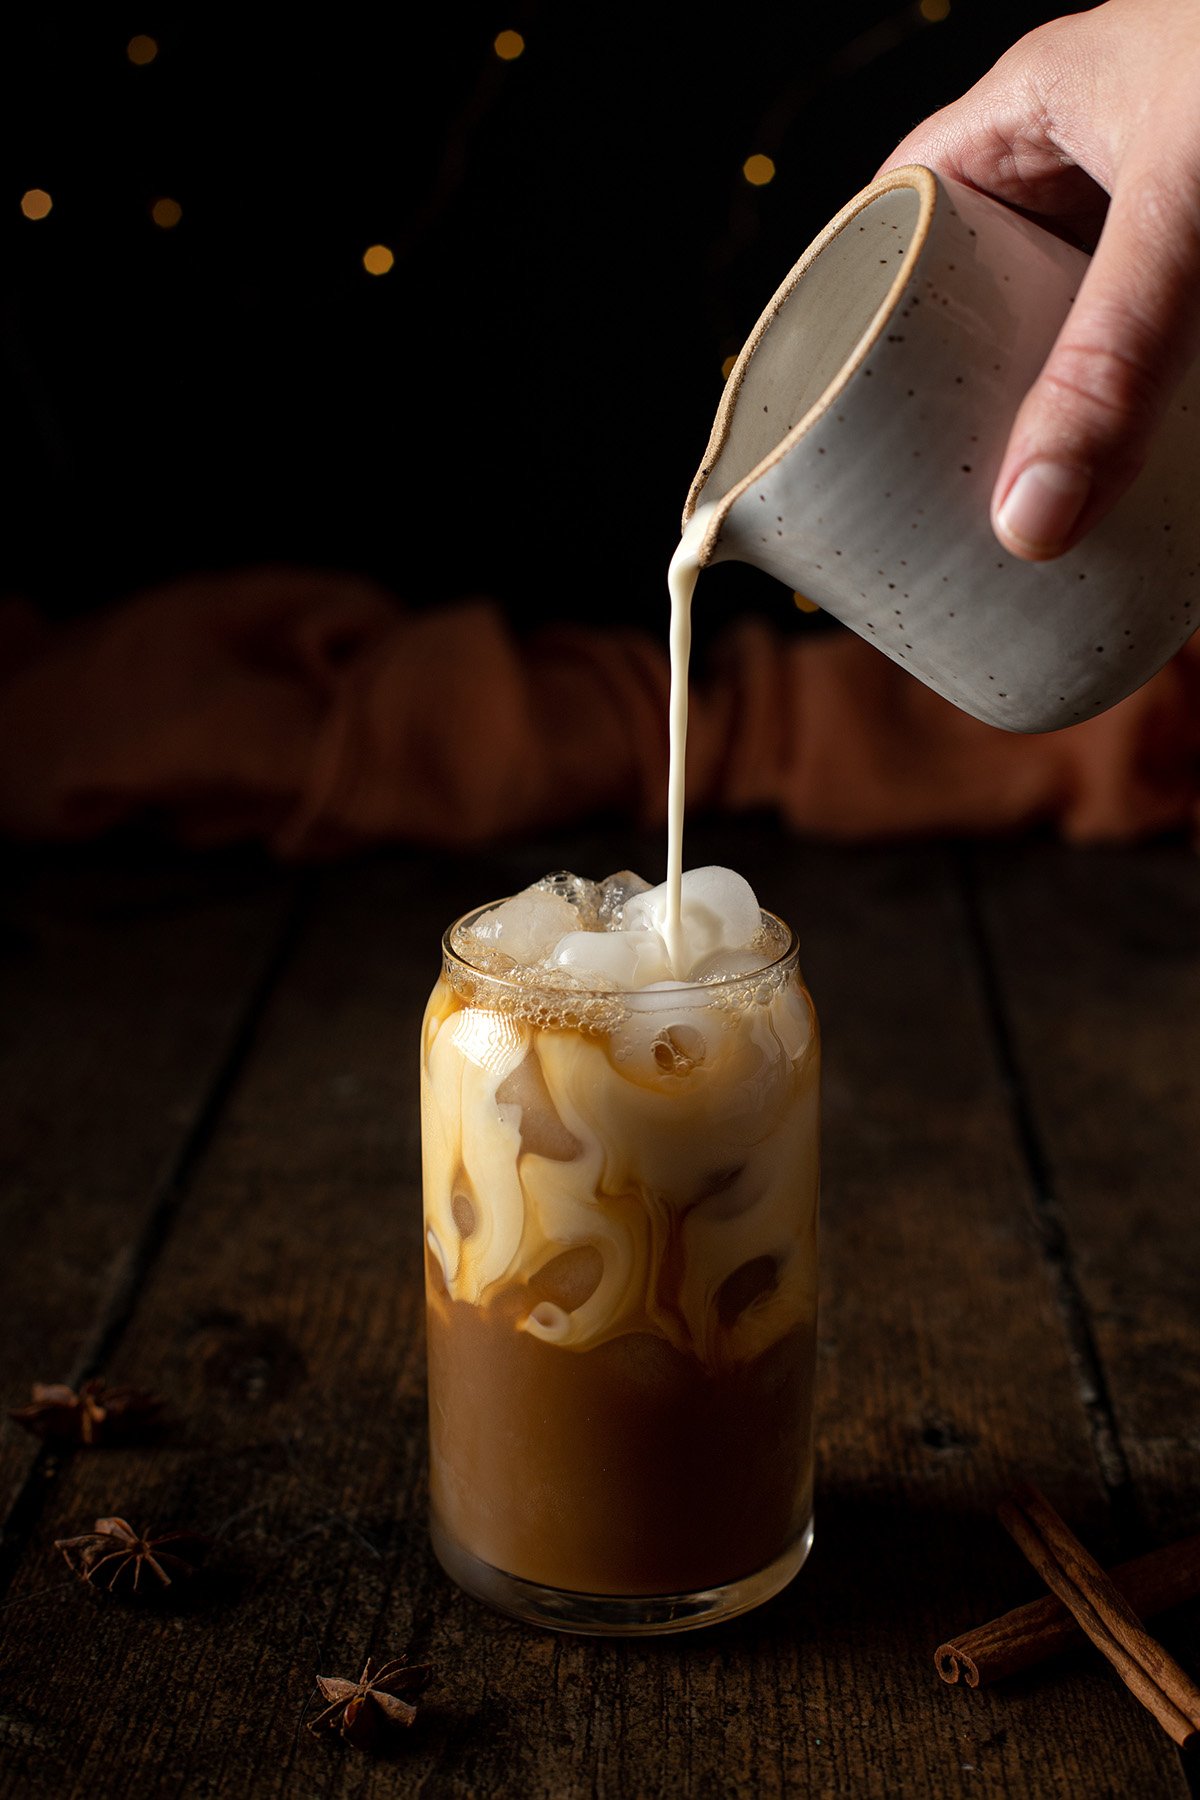 oat milk being poured into an iced chai latte